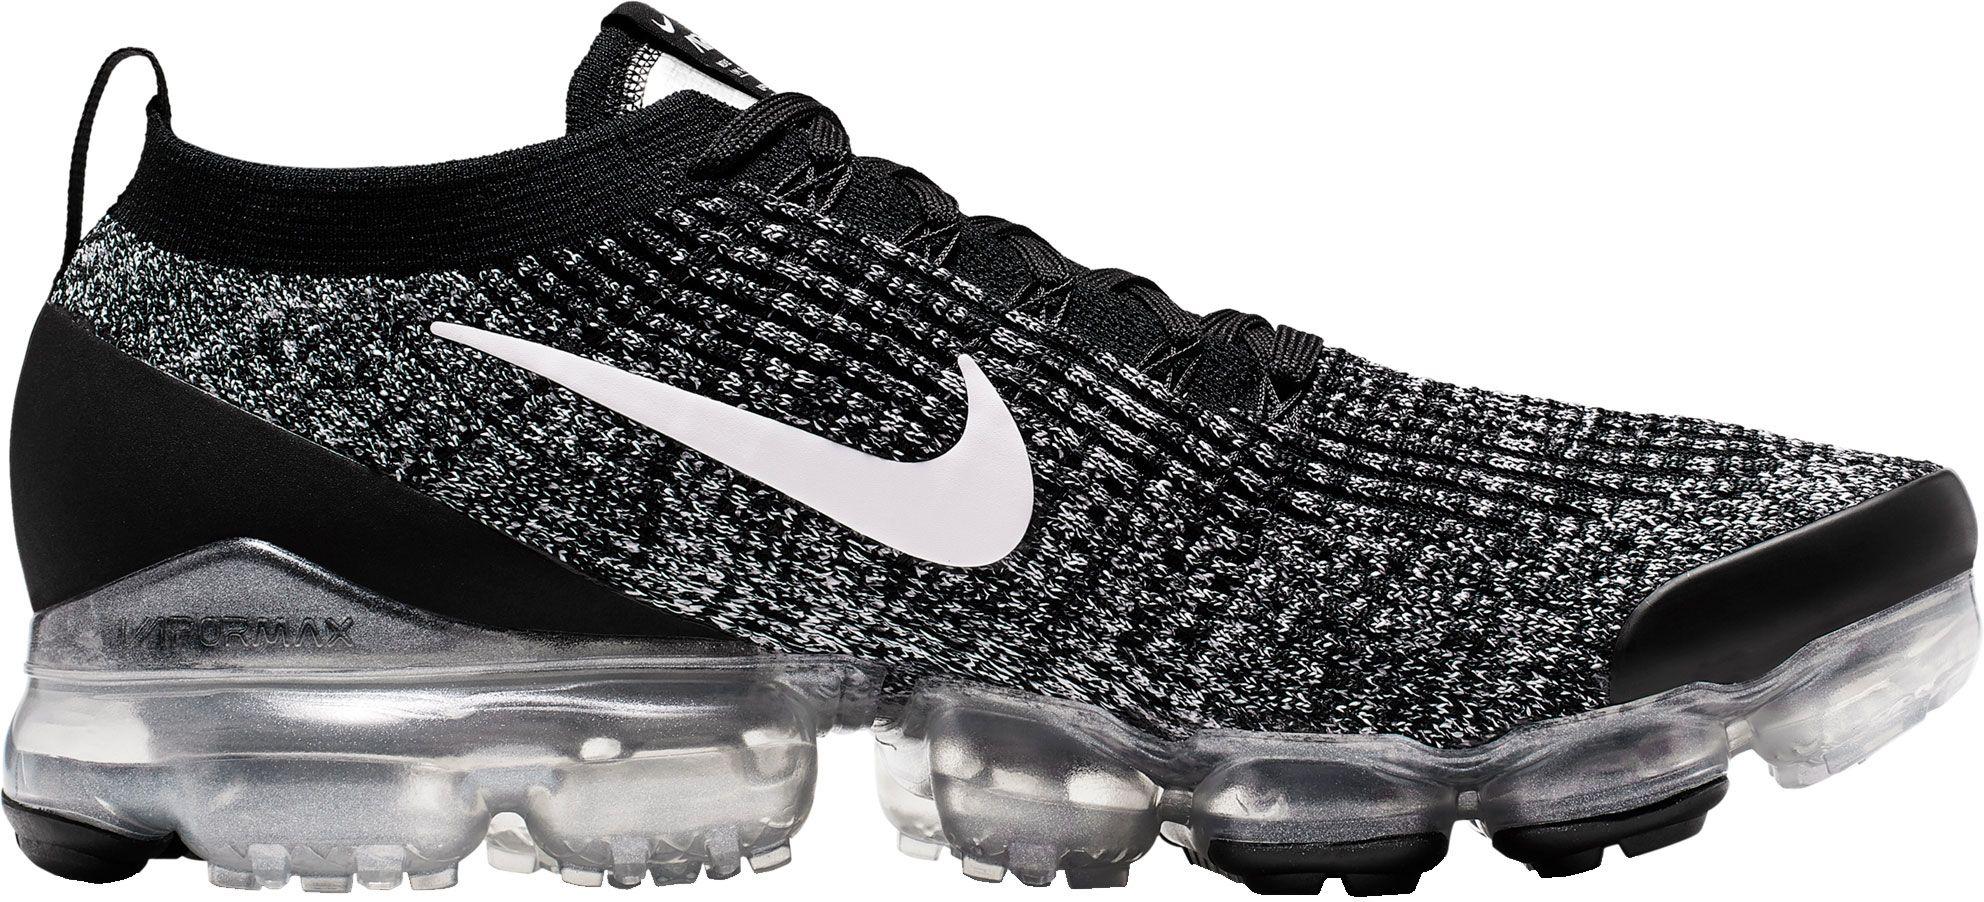 Nike Synthetic Air Vapormax Flyknit 3 Shoe in Black/White (Black) for ...